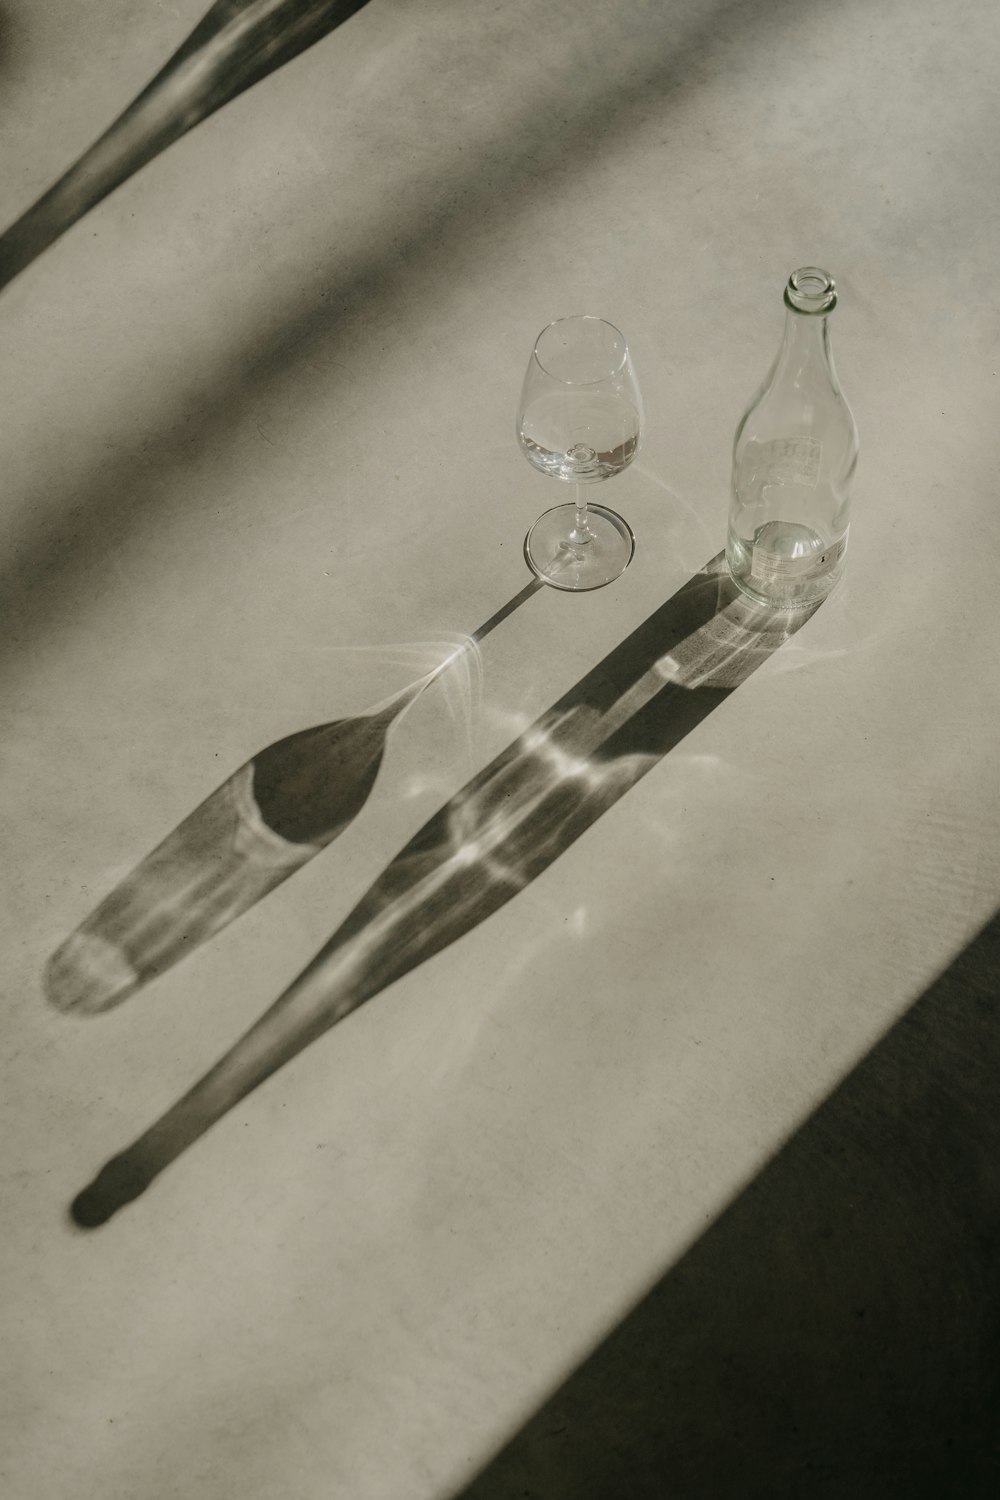 a table with a spoon and a bottle on it